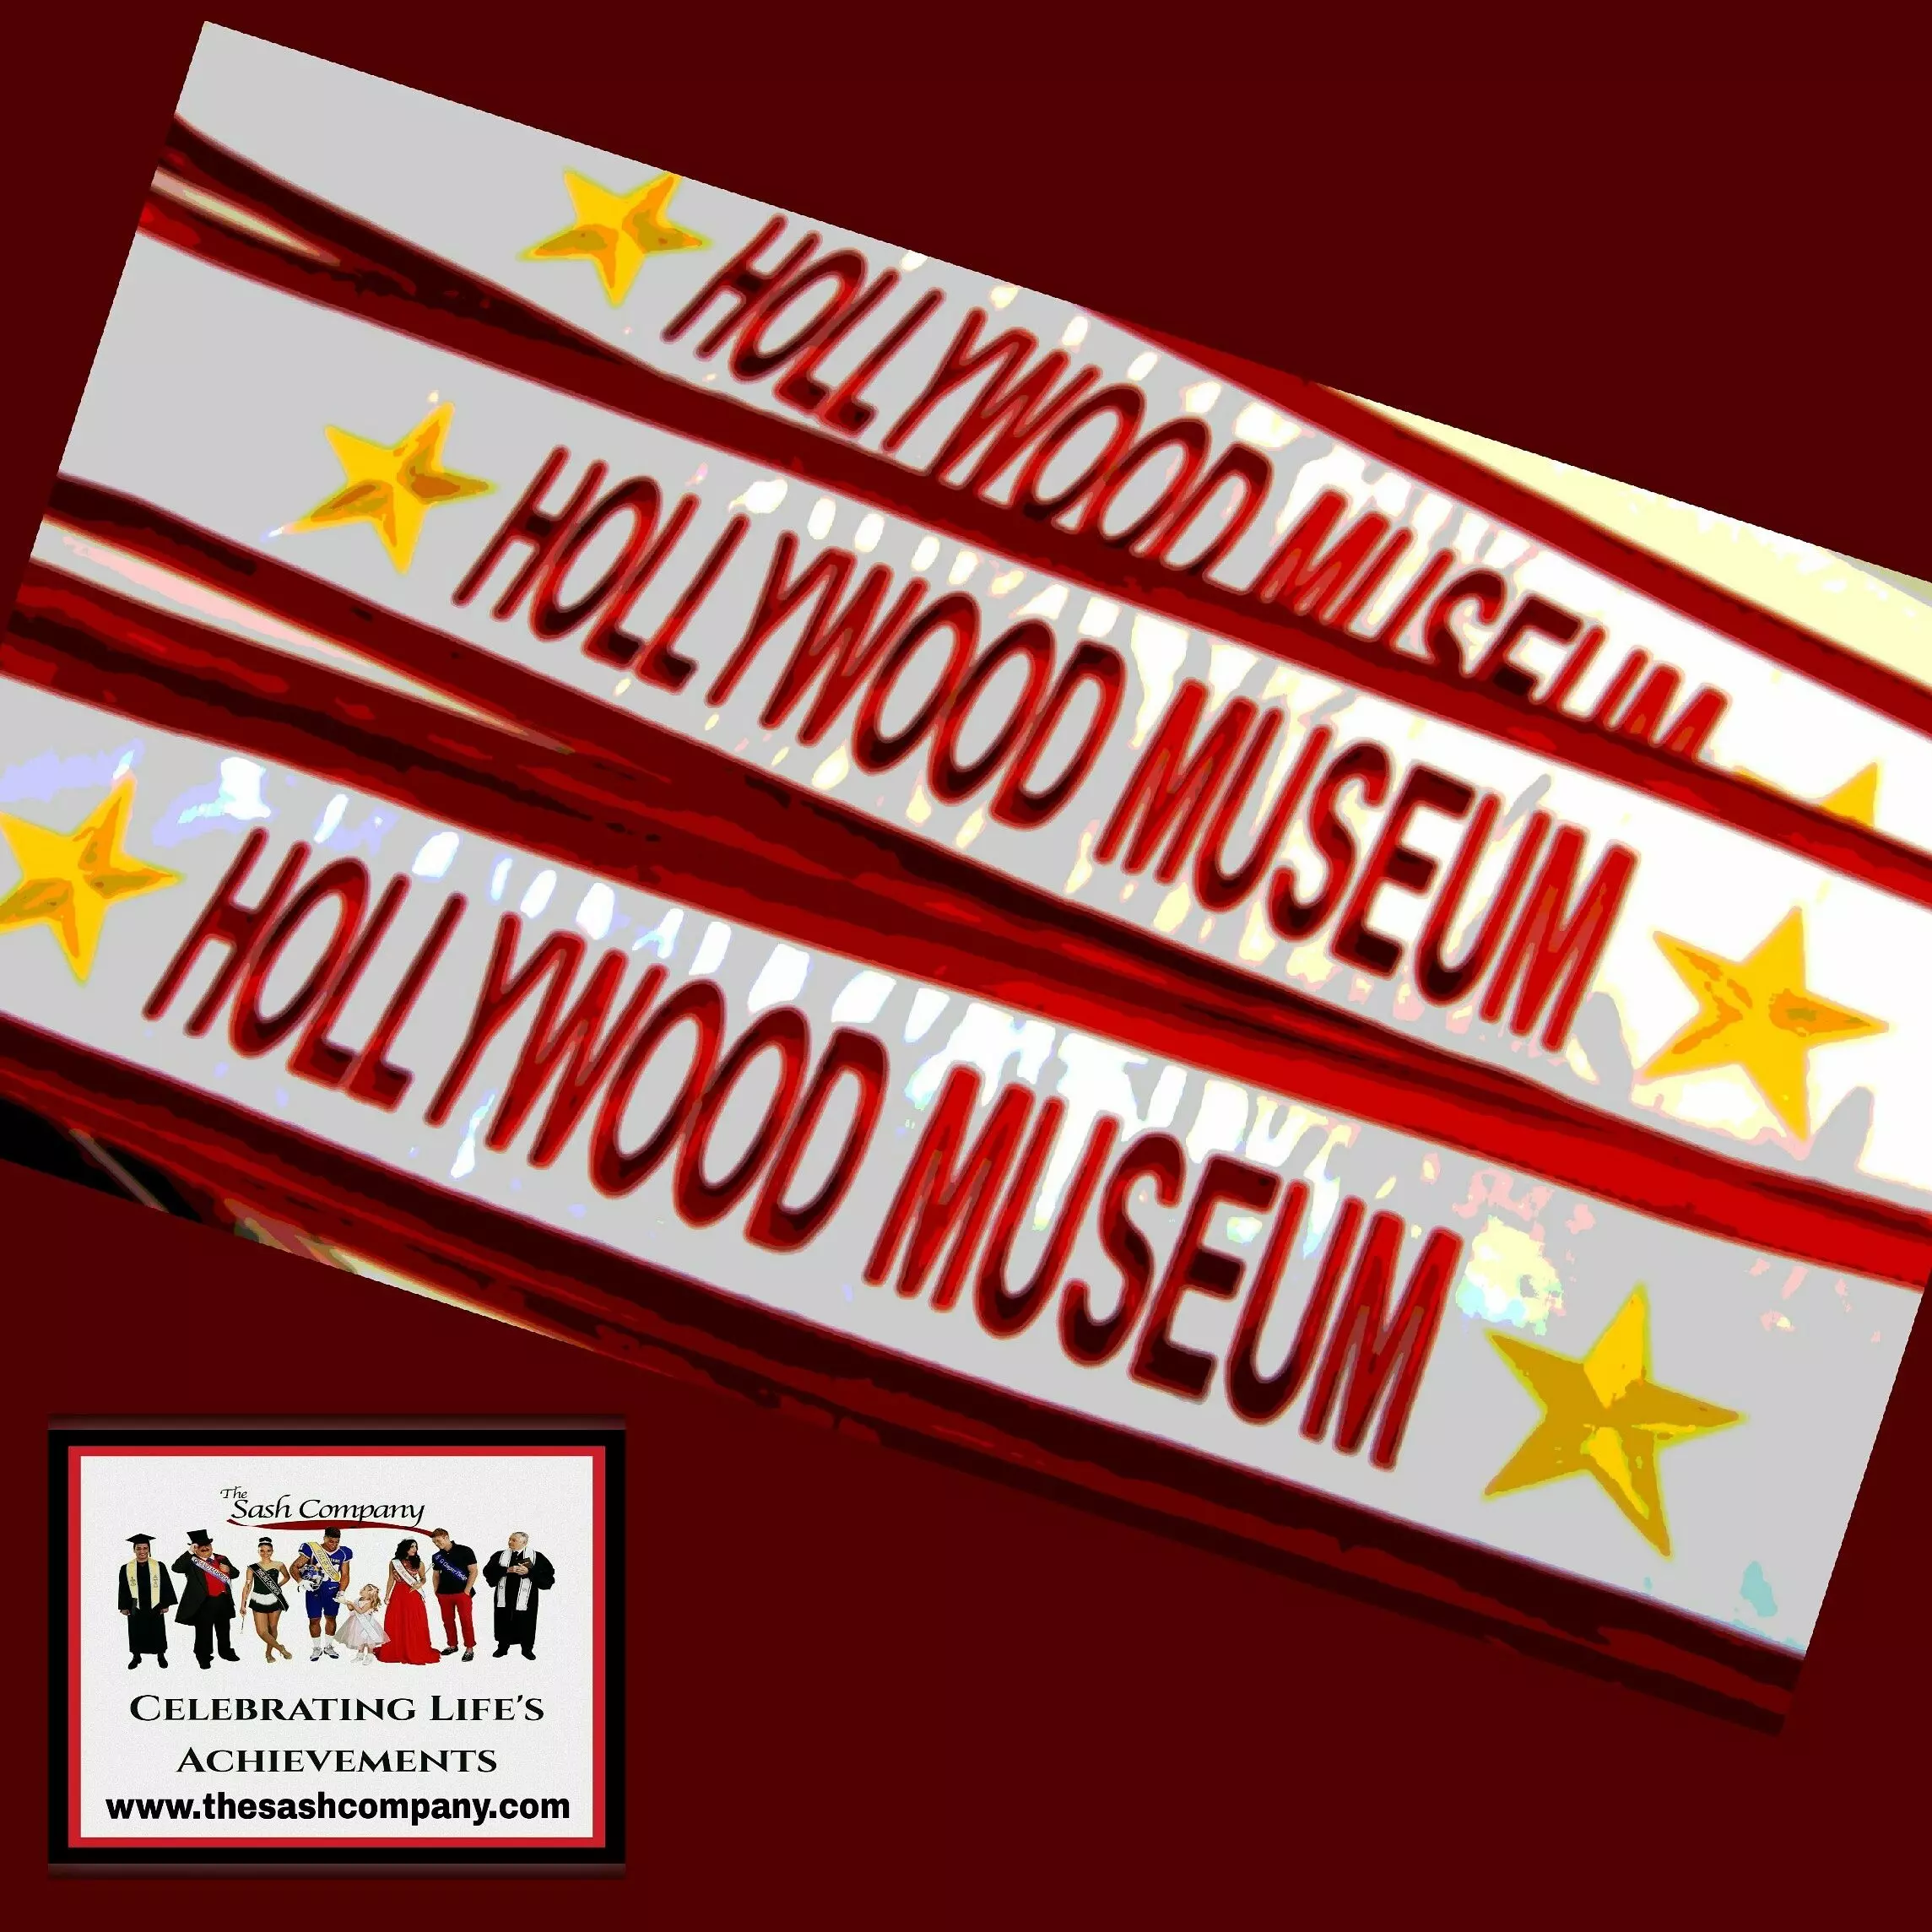 Hollywood Museum Sashes